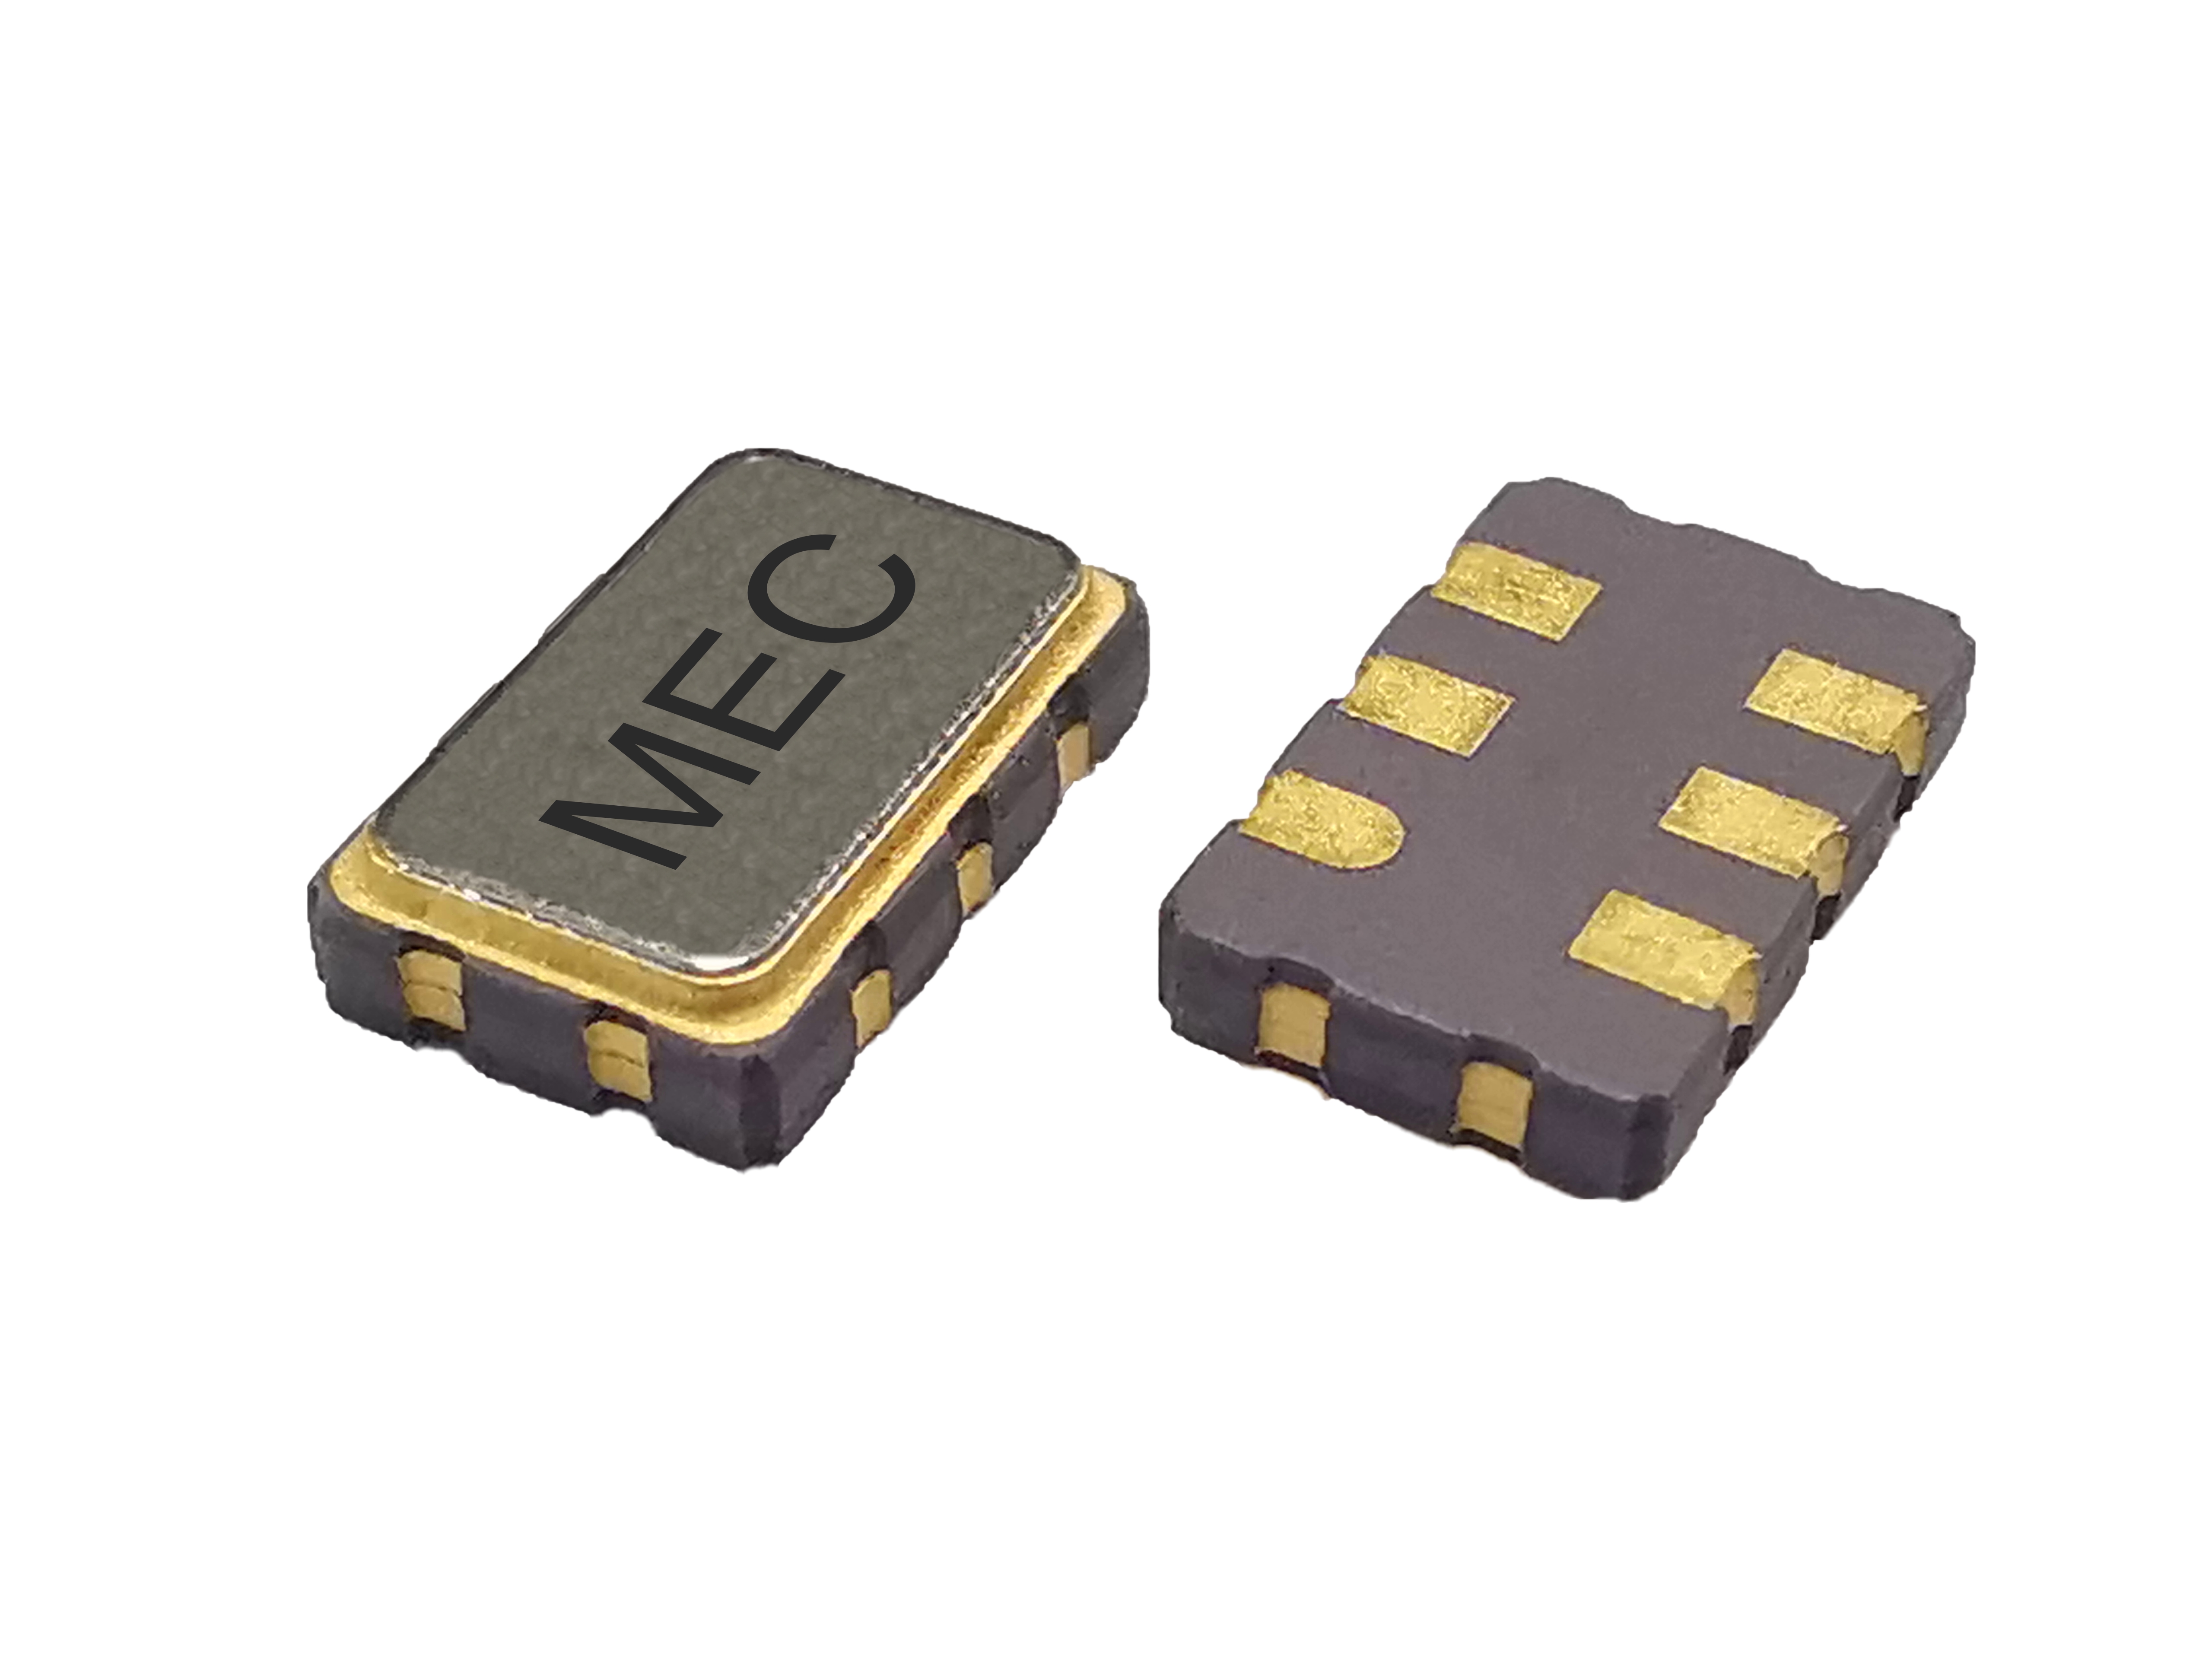 HPEK536 5032 3.3V Superb Phase Noise Differential With No PLL LVPECL SMD Crystal Oscillator